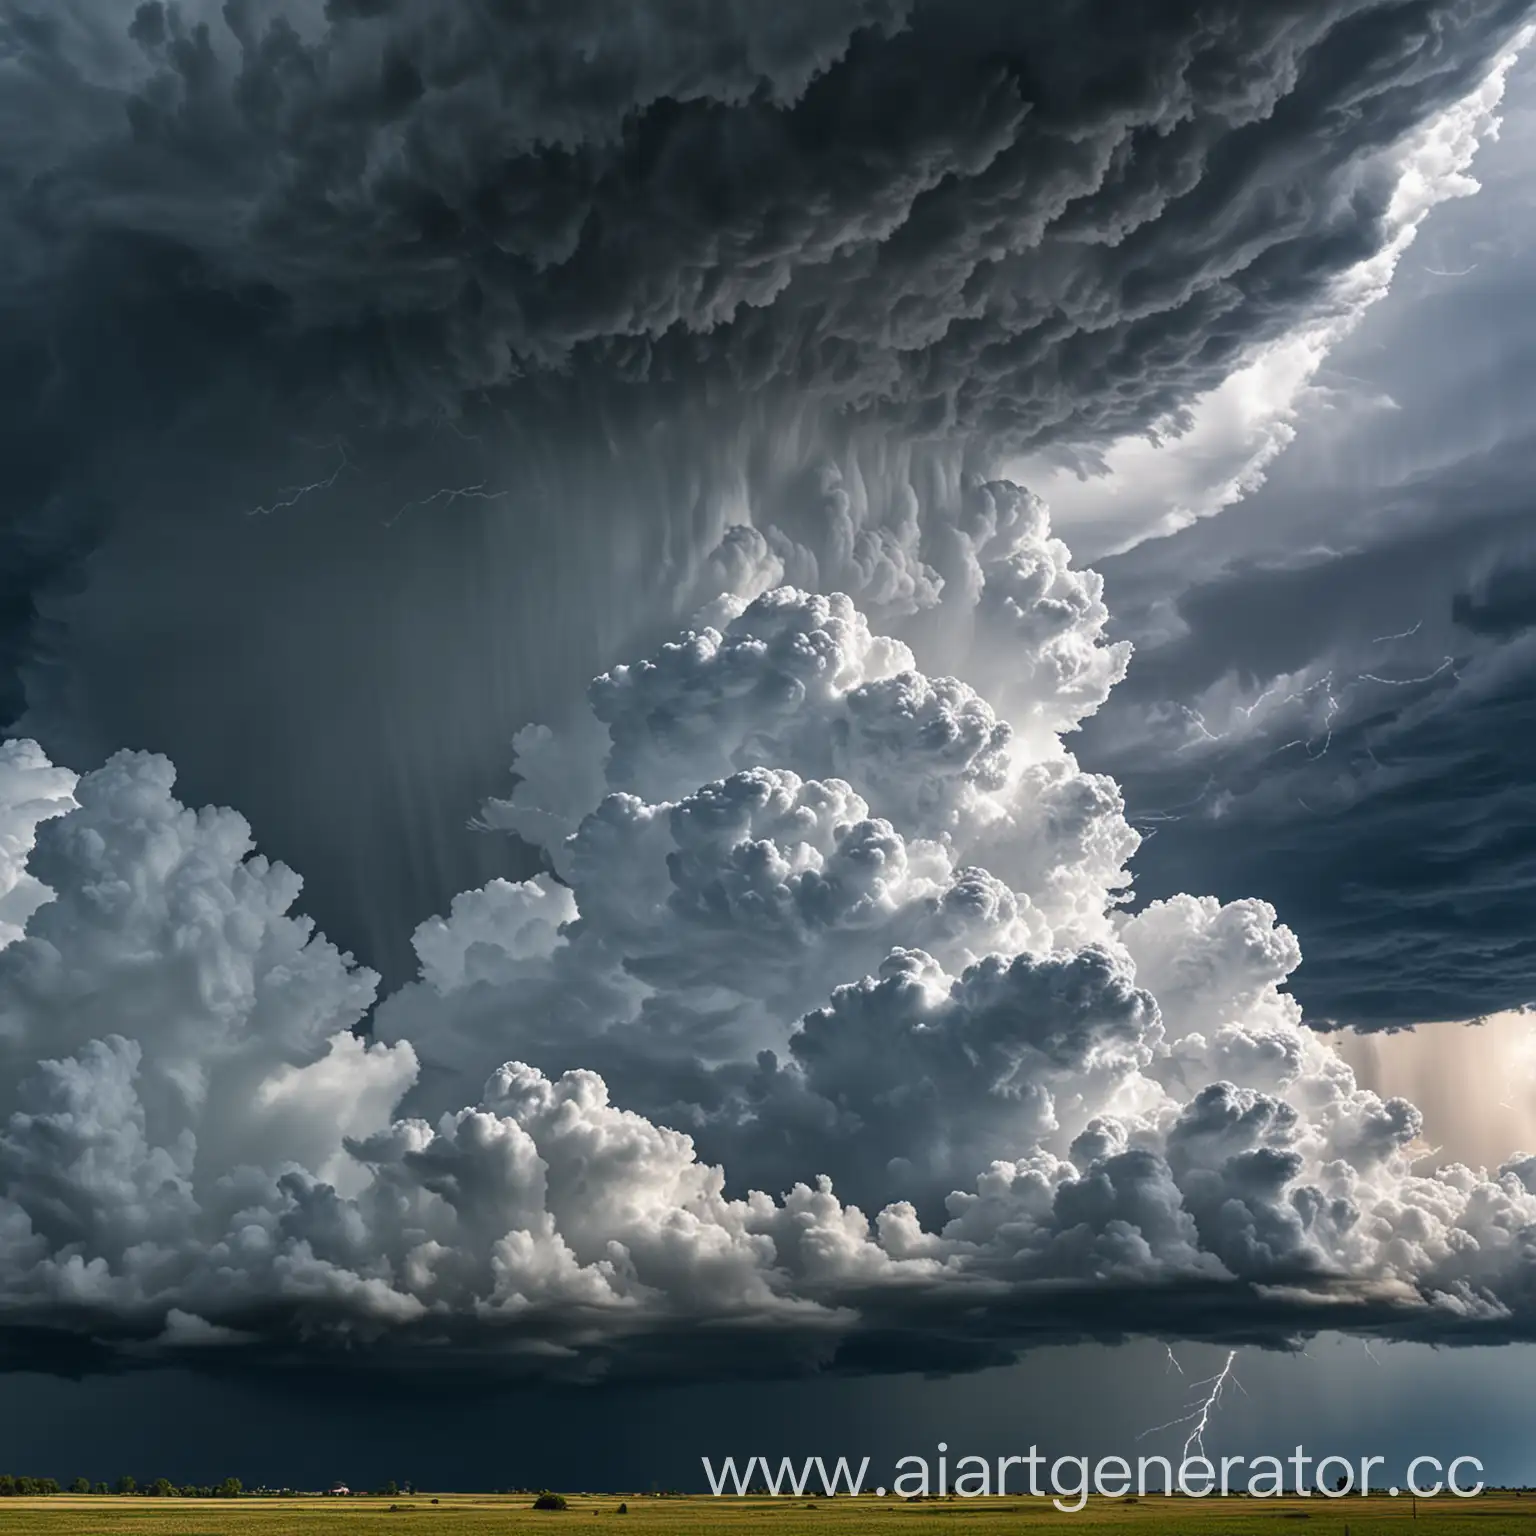 Dark-Thunderclouds-in-a-Strong-Storm